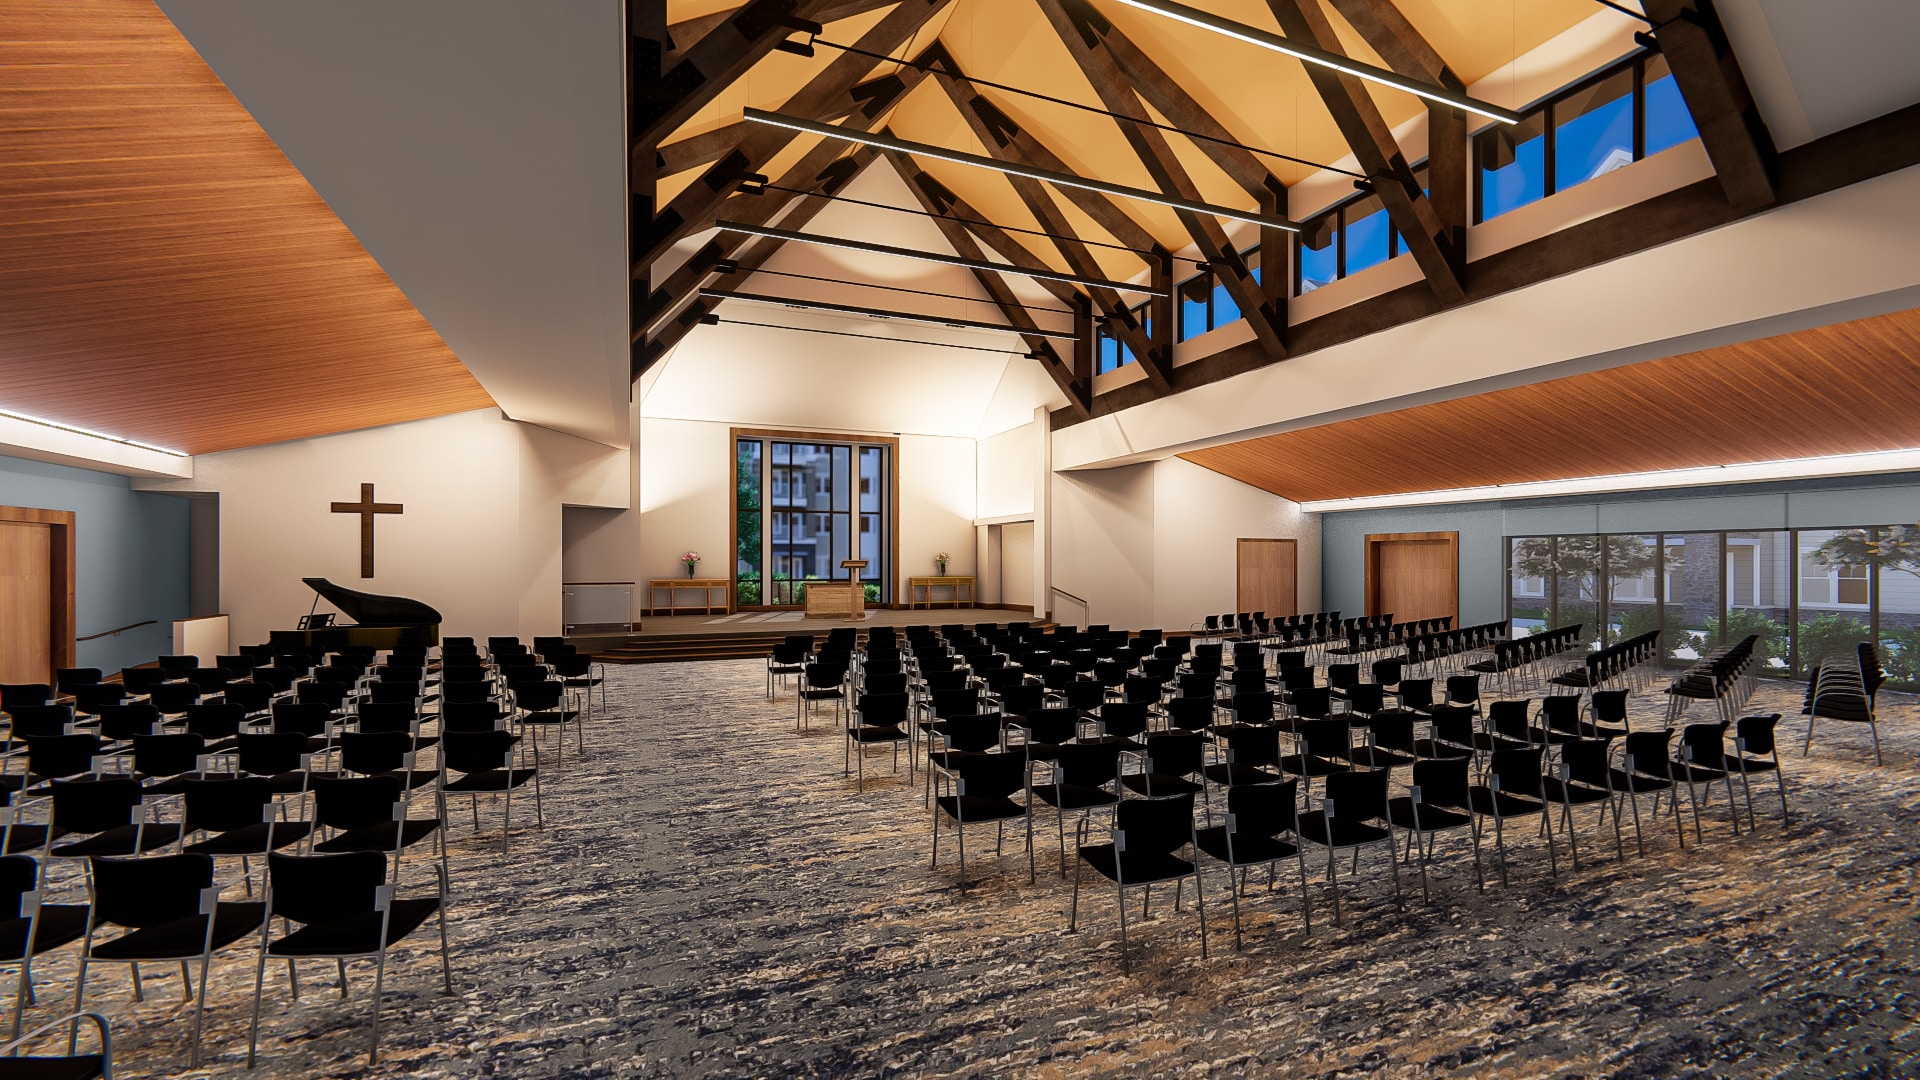 An inside view of the Performing Arts Center/Chapel, which is supported by the Mission Possible capital campaign, set up for worship service seating.